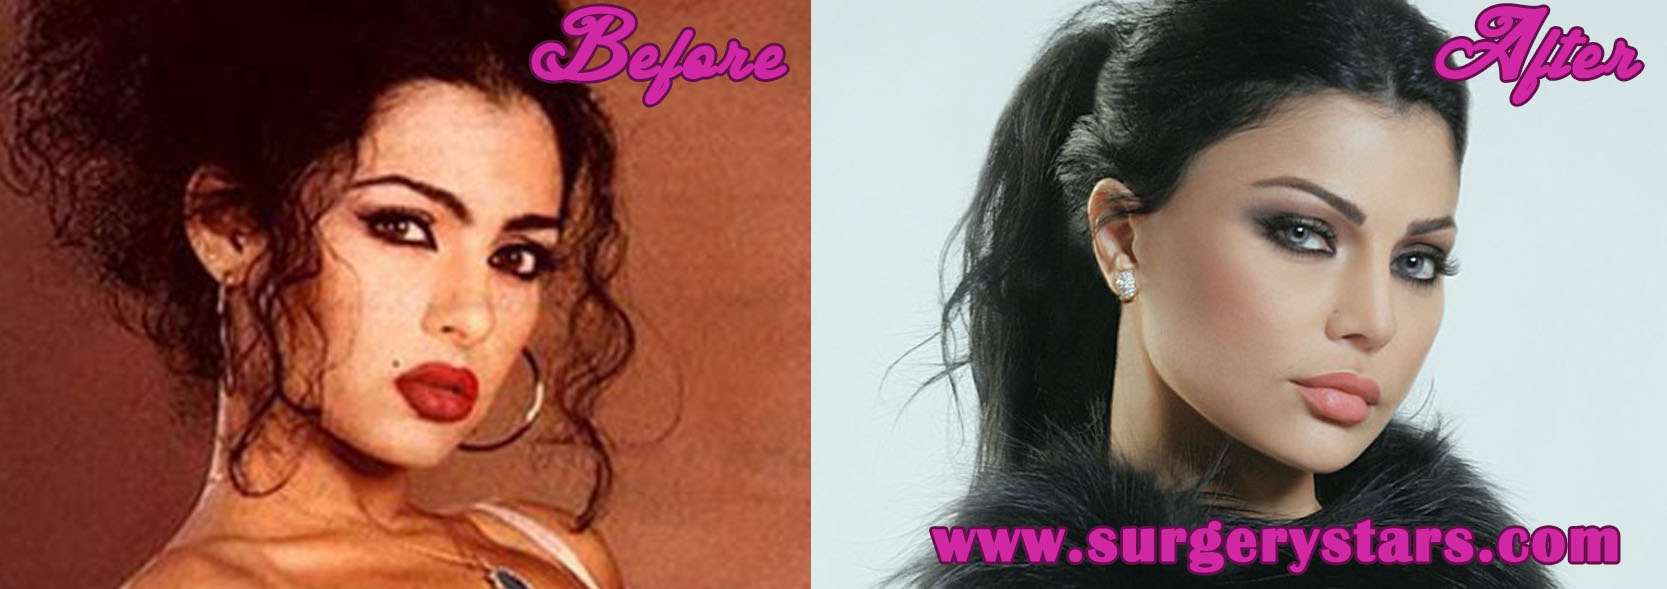 Haifa Wehbe Plastic Surgery - Before and After Pictures.